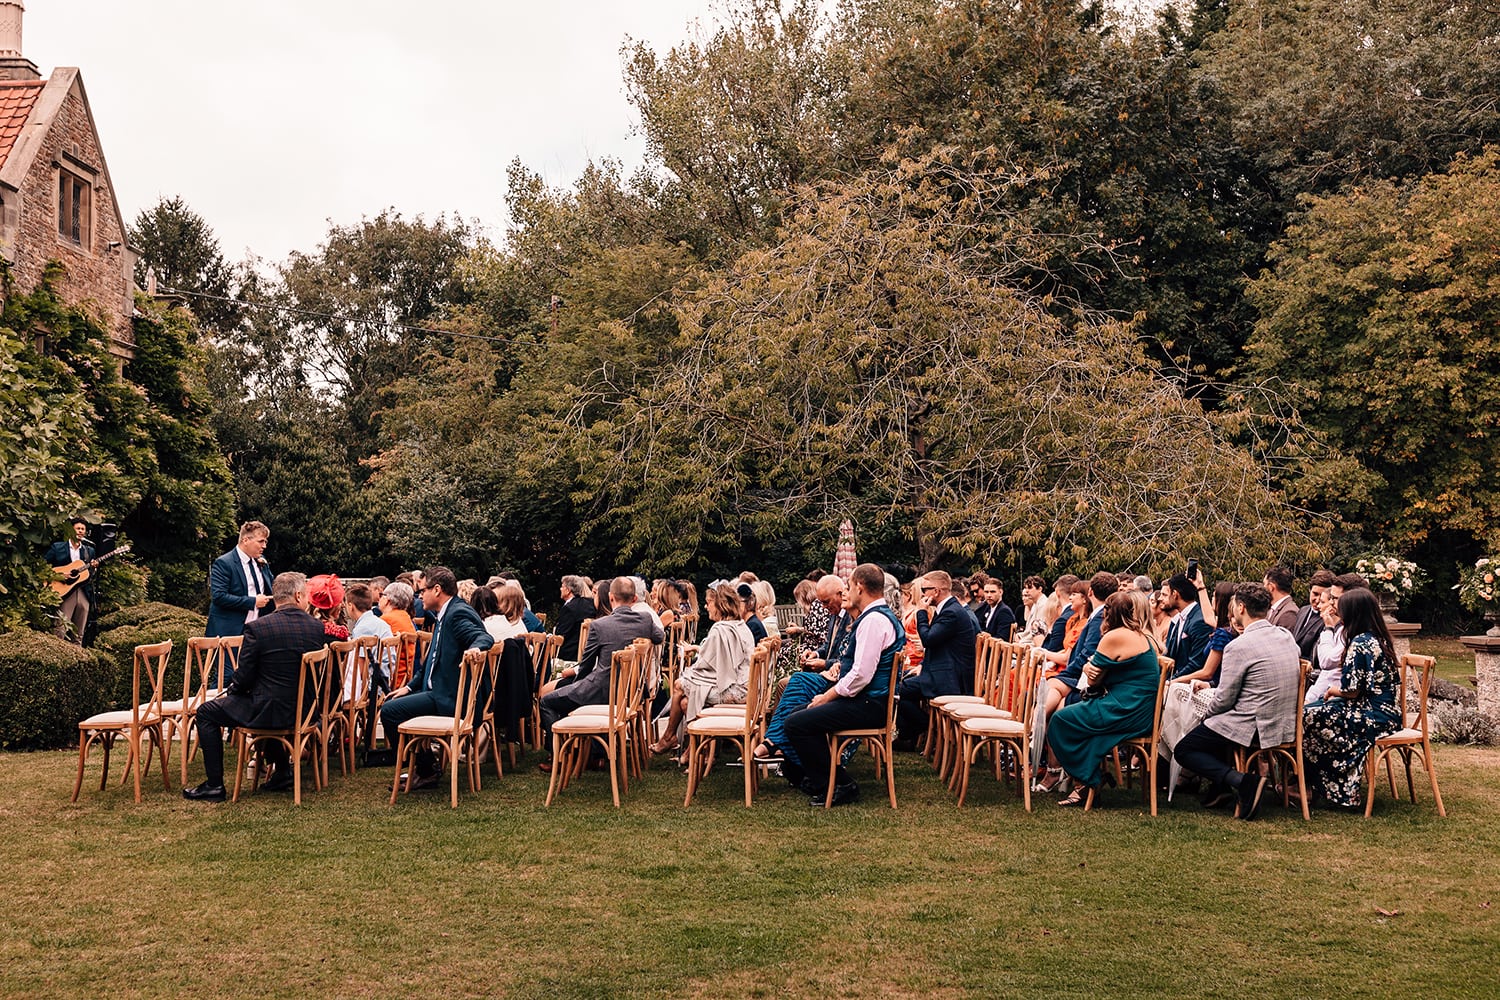 Guests waiting for the arrival of the bride at an outdoor wedding ceremony in Yorkshire